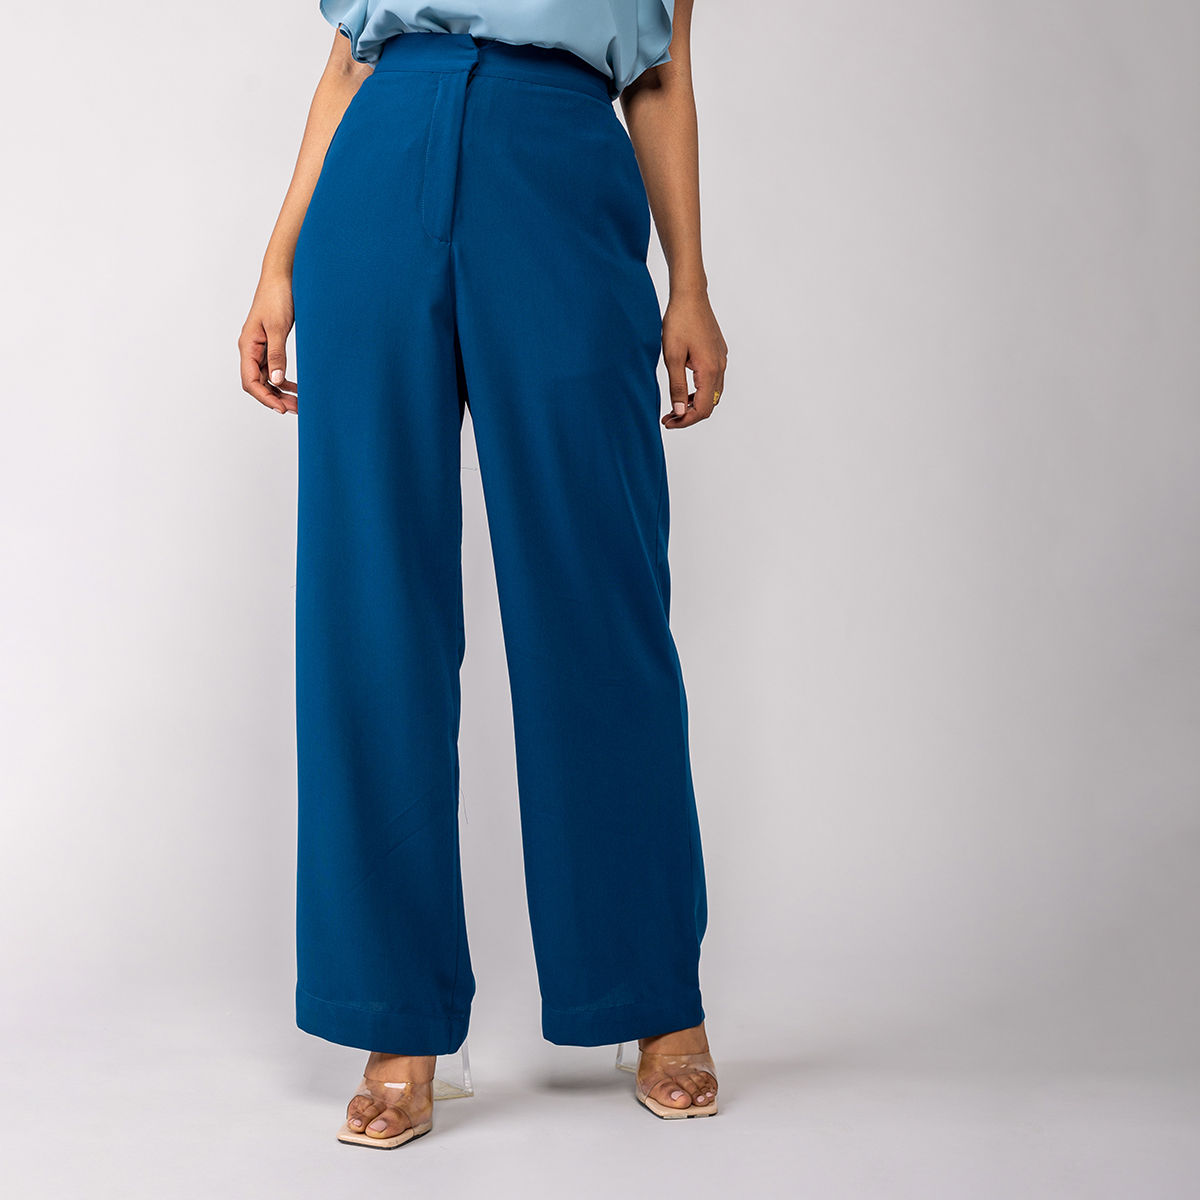 Flared pants that are all the rage  Times of India